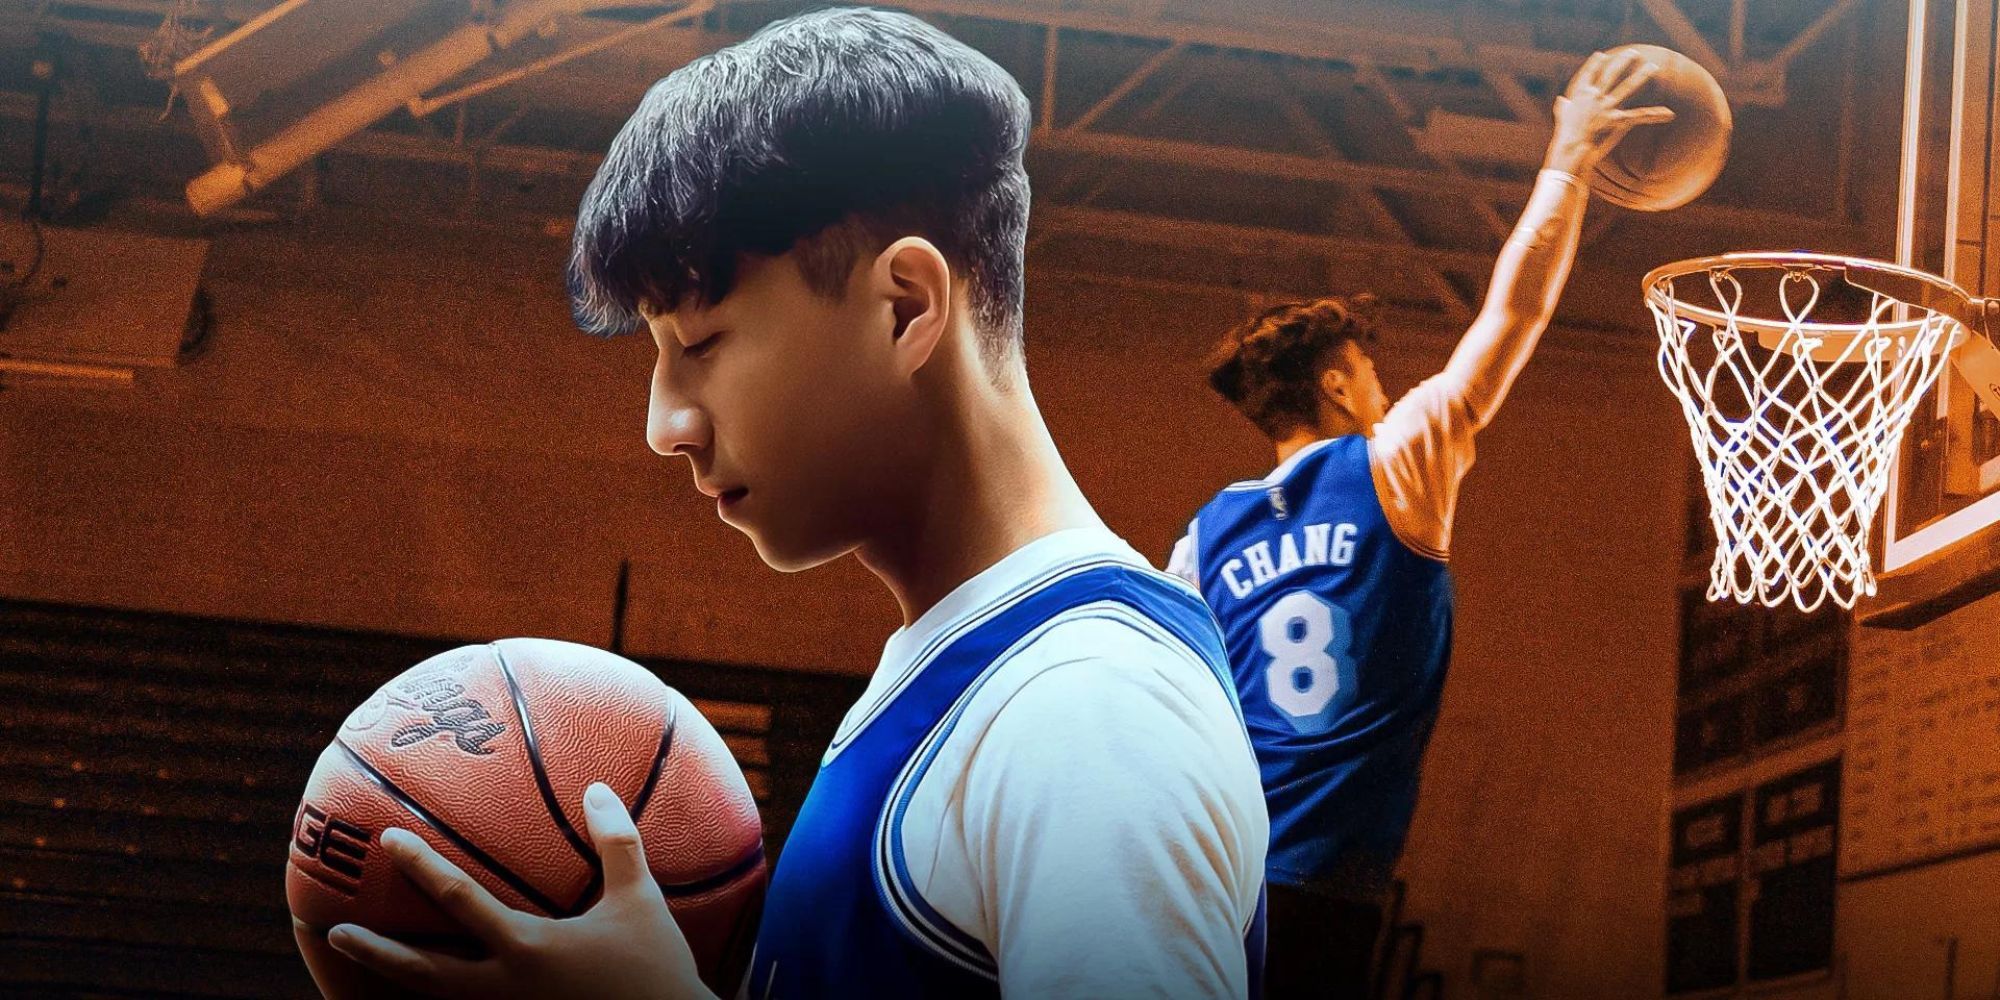 where to watch chang can dunk on disney+ dinsye plus sports movies